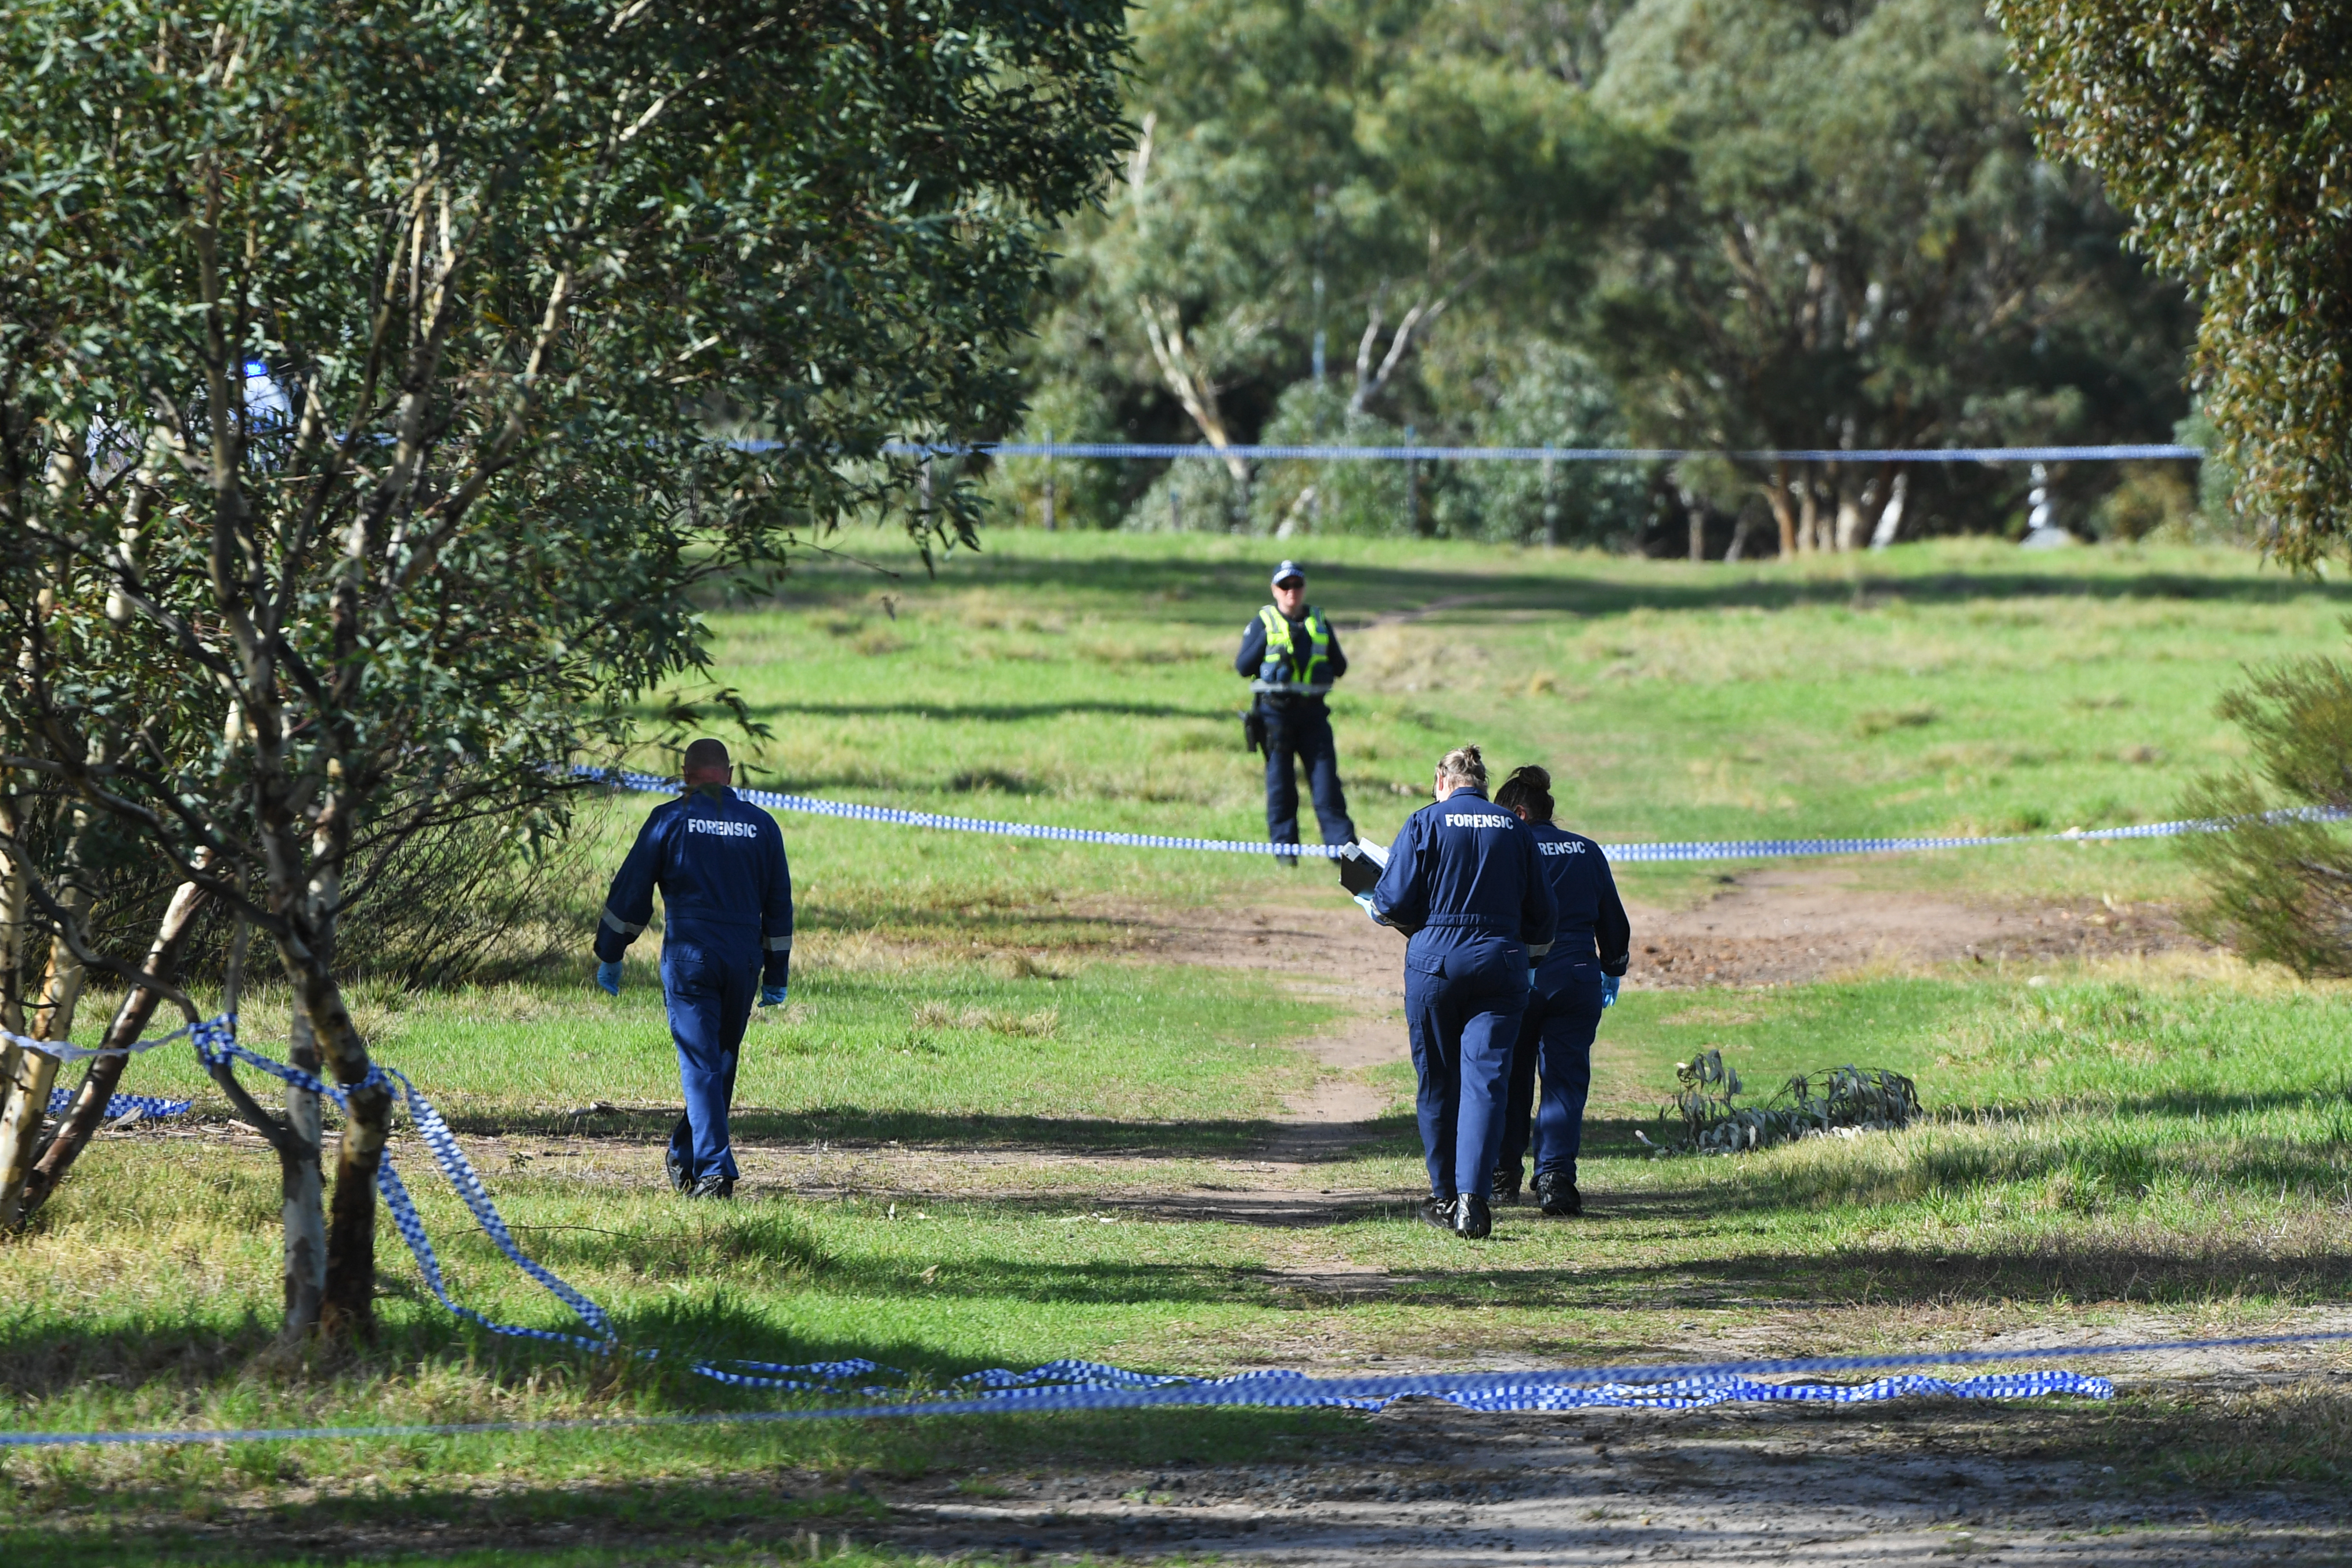 Police Investigating After Woman’s Body Found In Melbourne Park